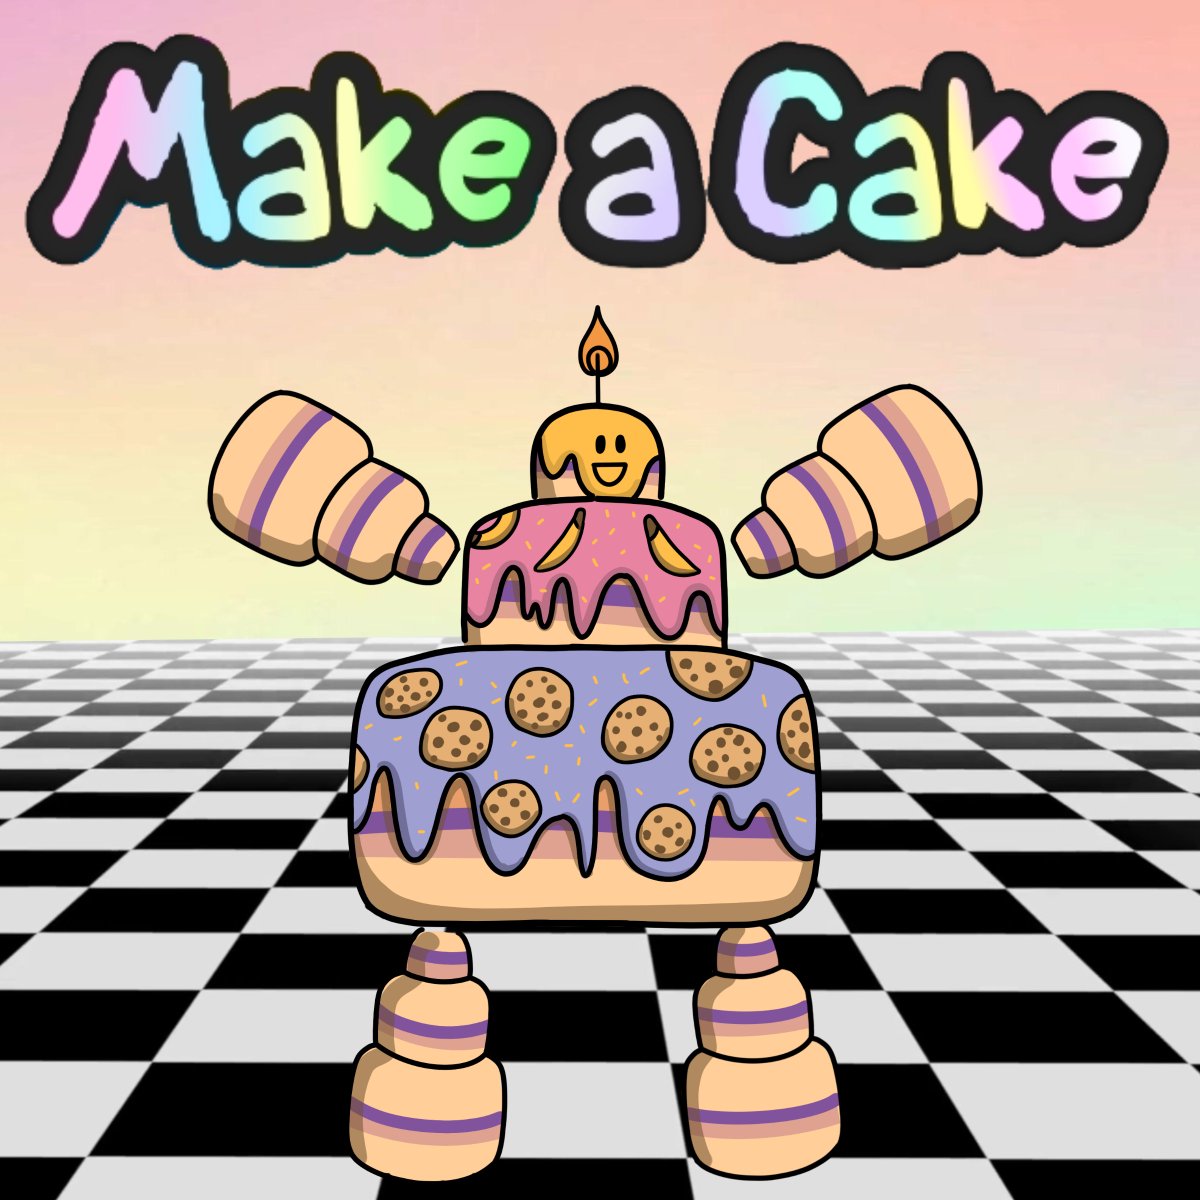 Thebenster On Twitter Make A Cake S Newest Update Is Now Out We Got A Lot Of Things For You New Badge Tool Gamepass Skins Birthday Gui Death Gui Leaderboard Gui Health Gui - roblox gamepass gui